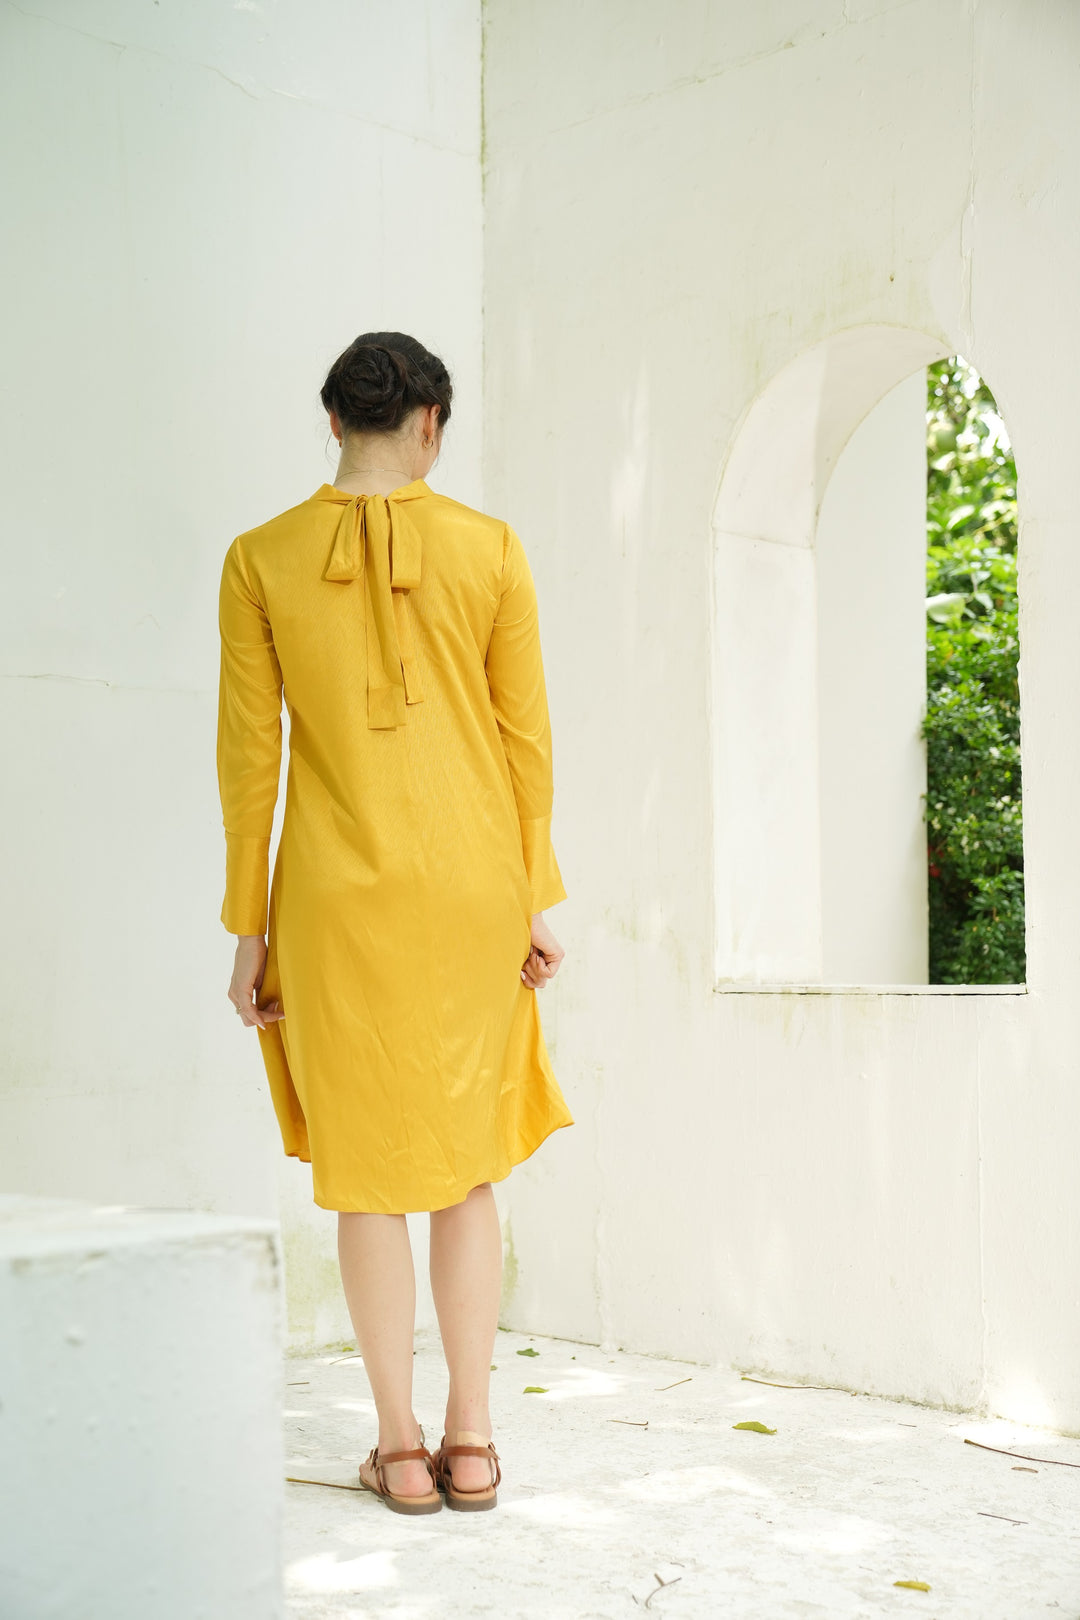 High-Low dress, loose fitting zipper-Yellow color